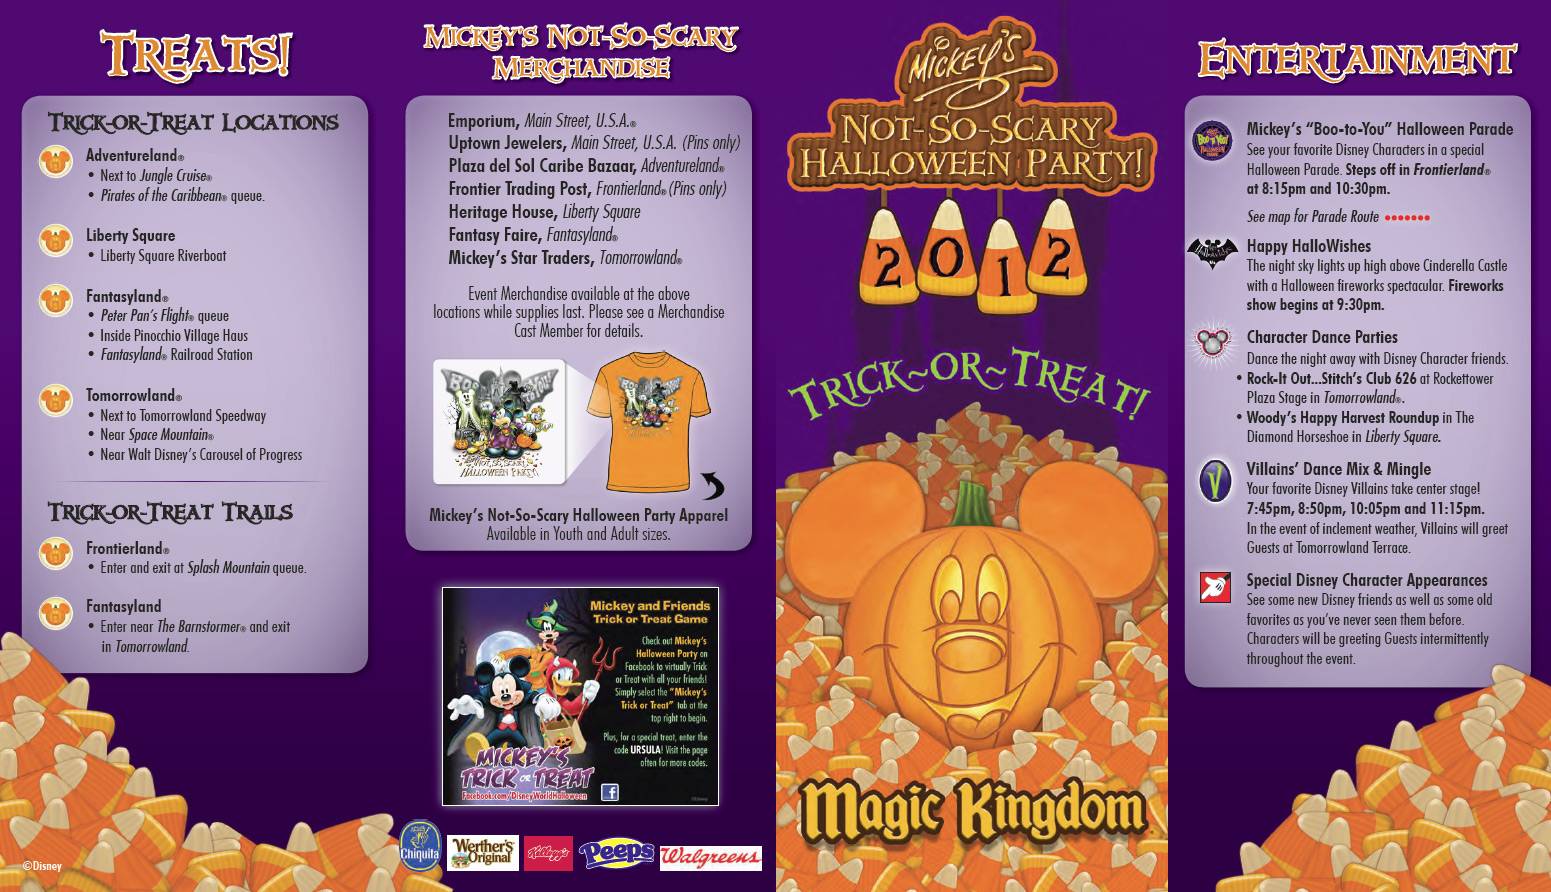 PHOTOS - Mickey's Not-So-Scary Halloween Party 2012 guide map